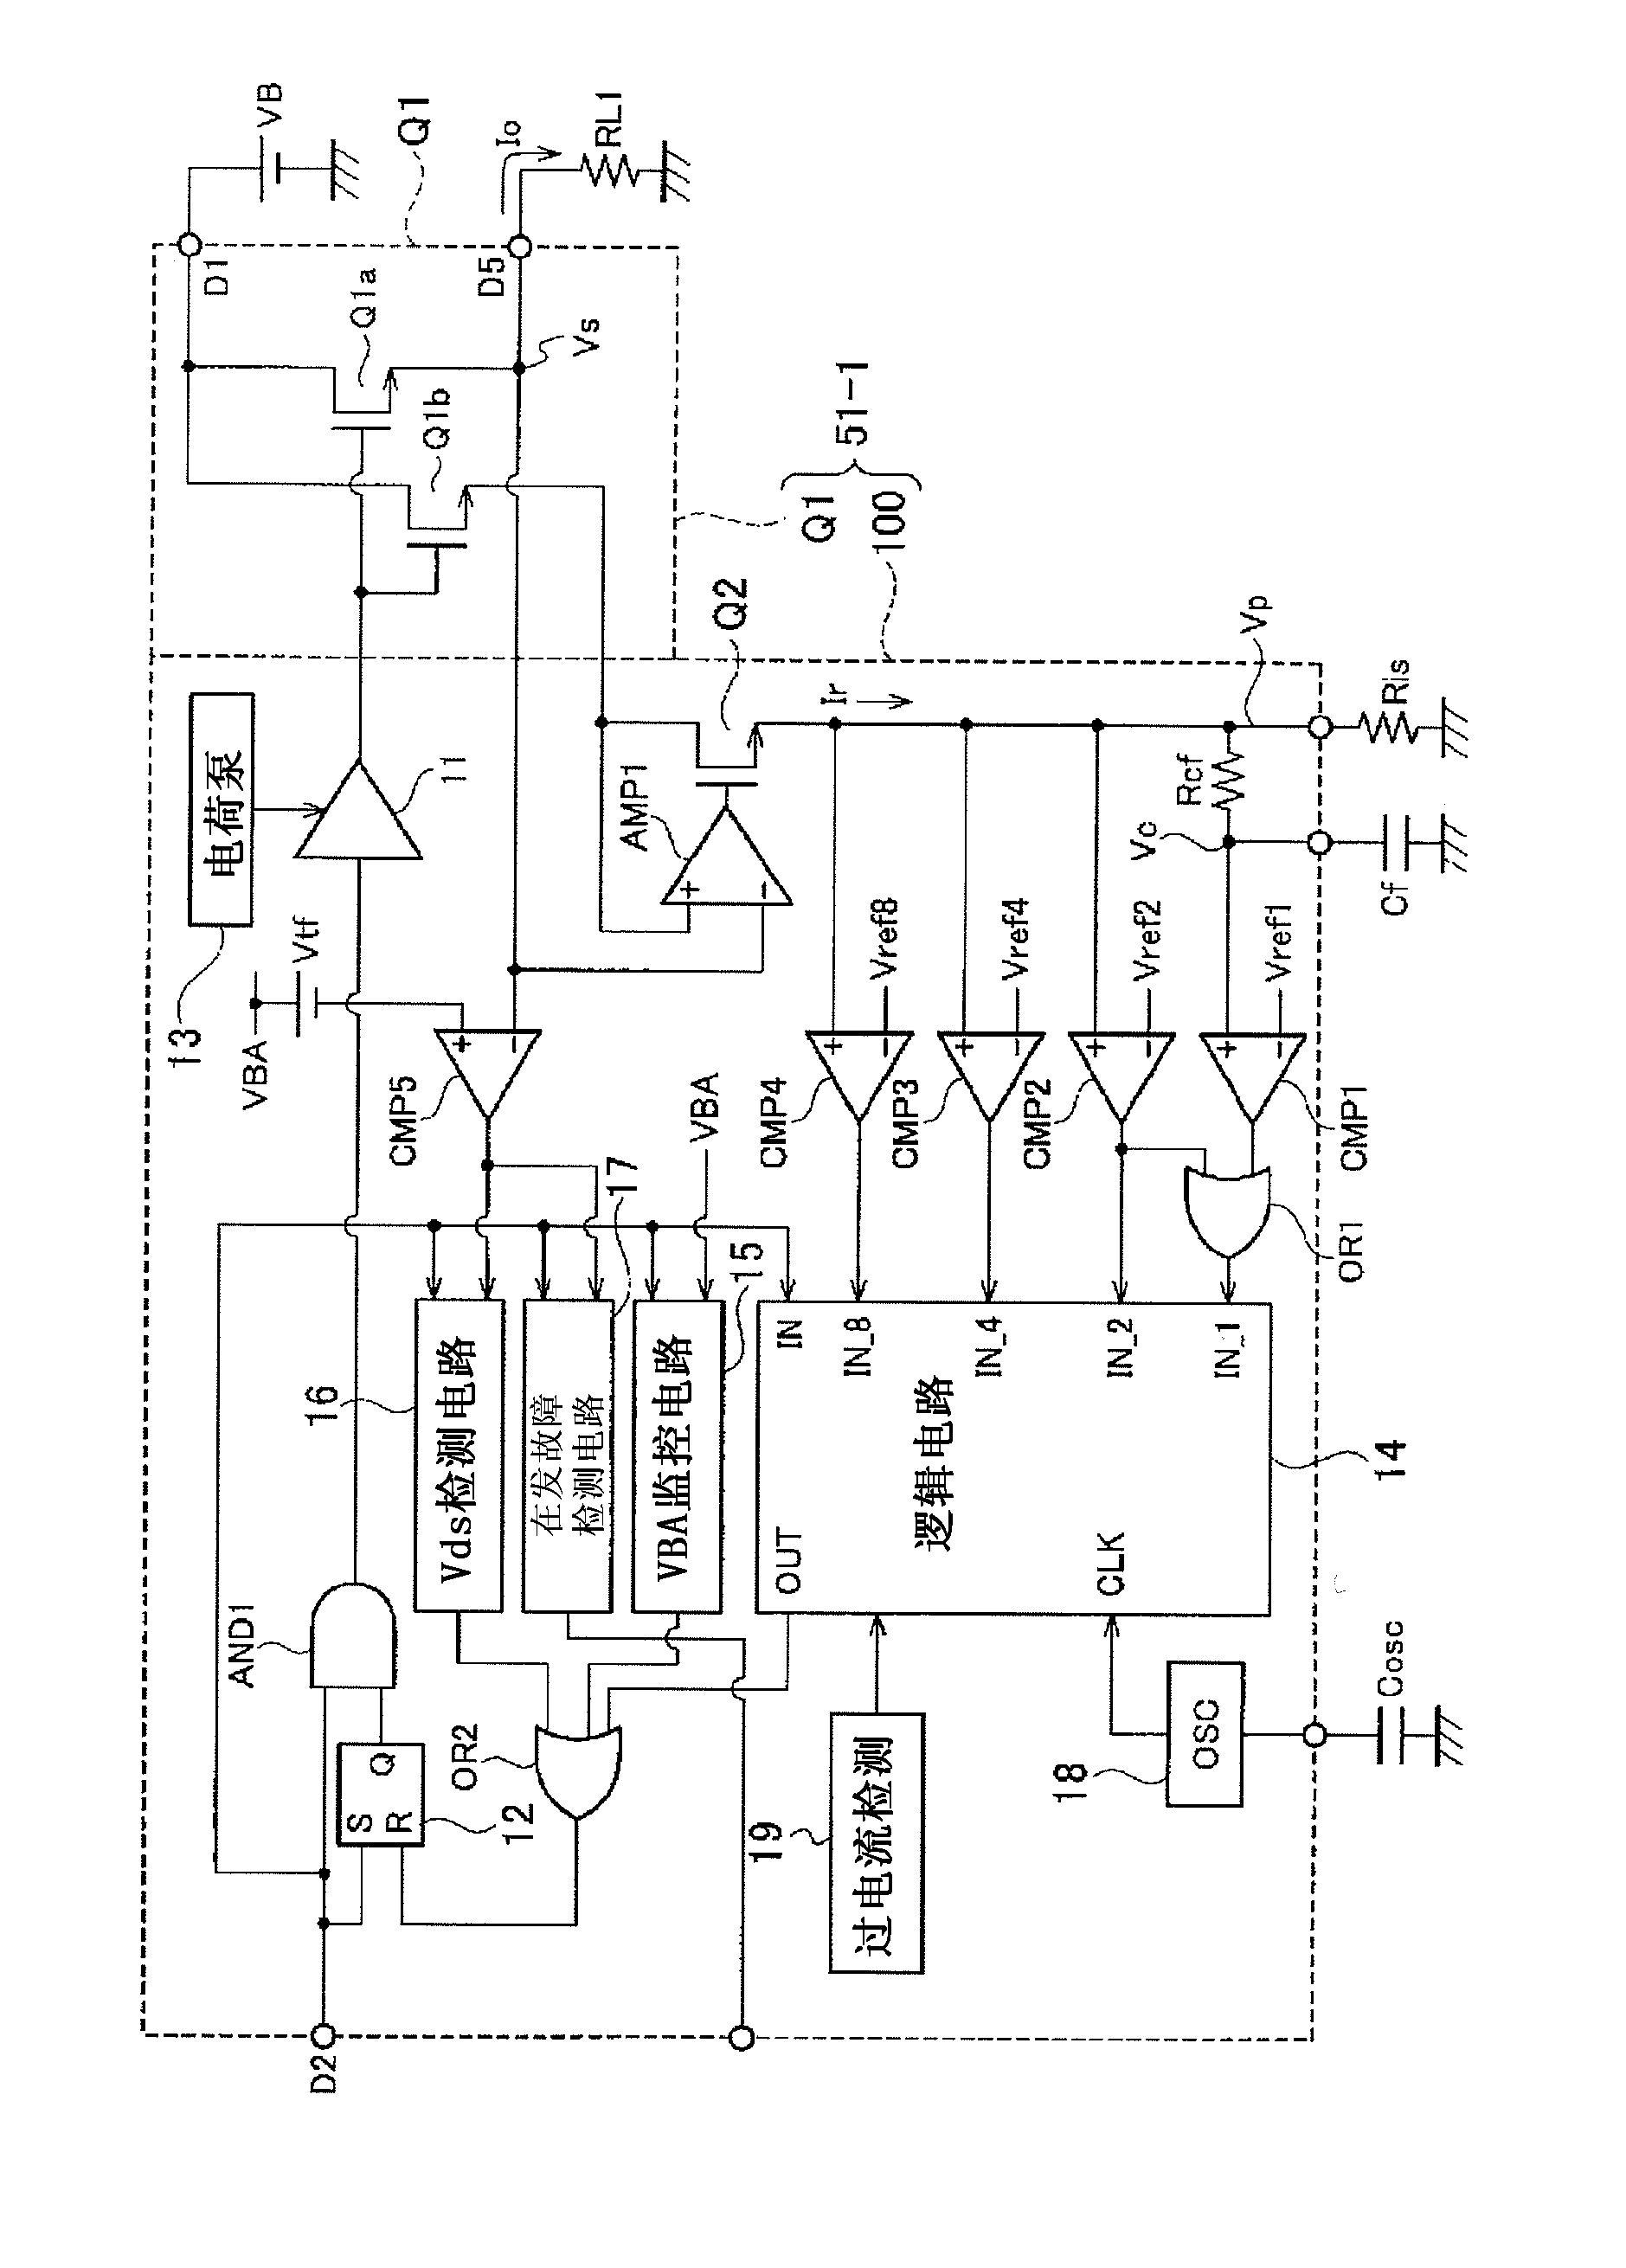 Overcurrent protection device and overcurrent protection system